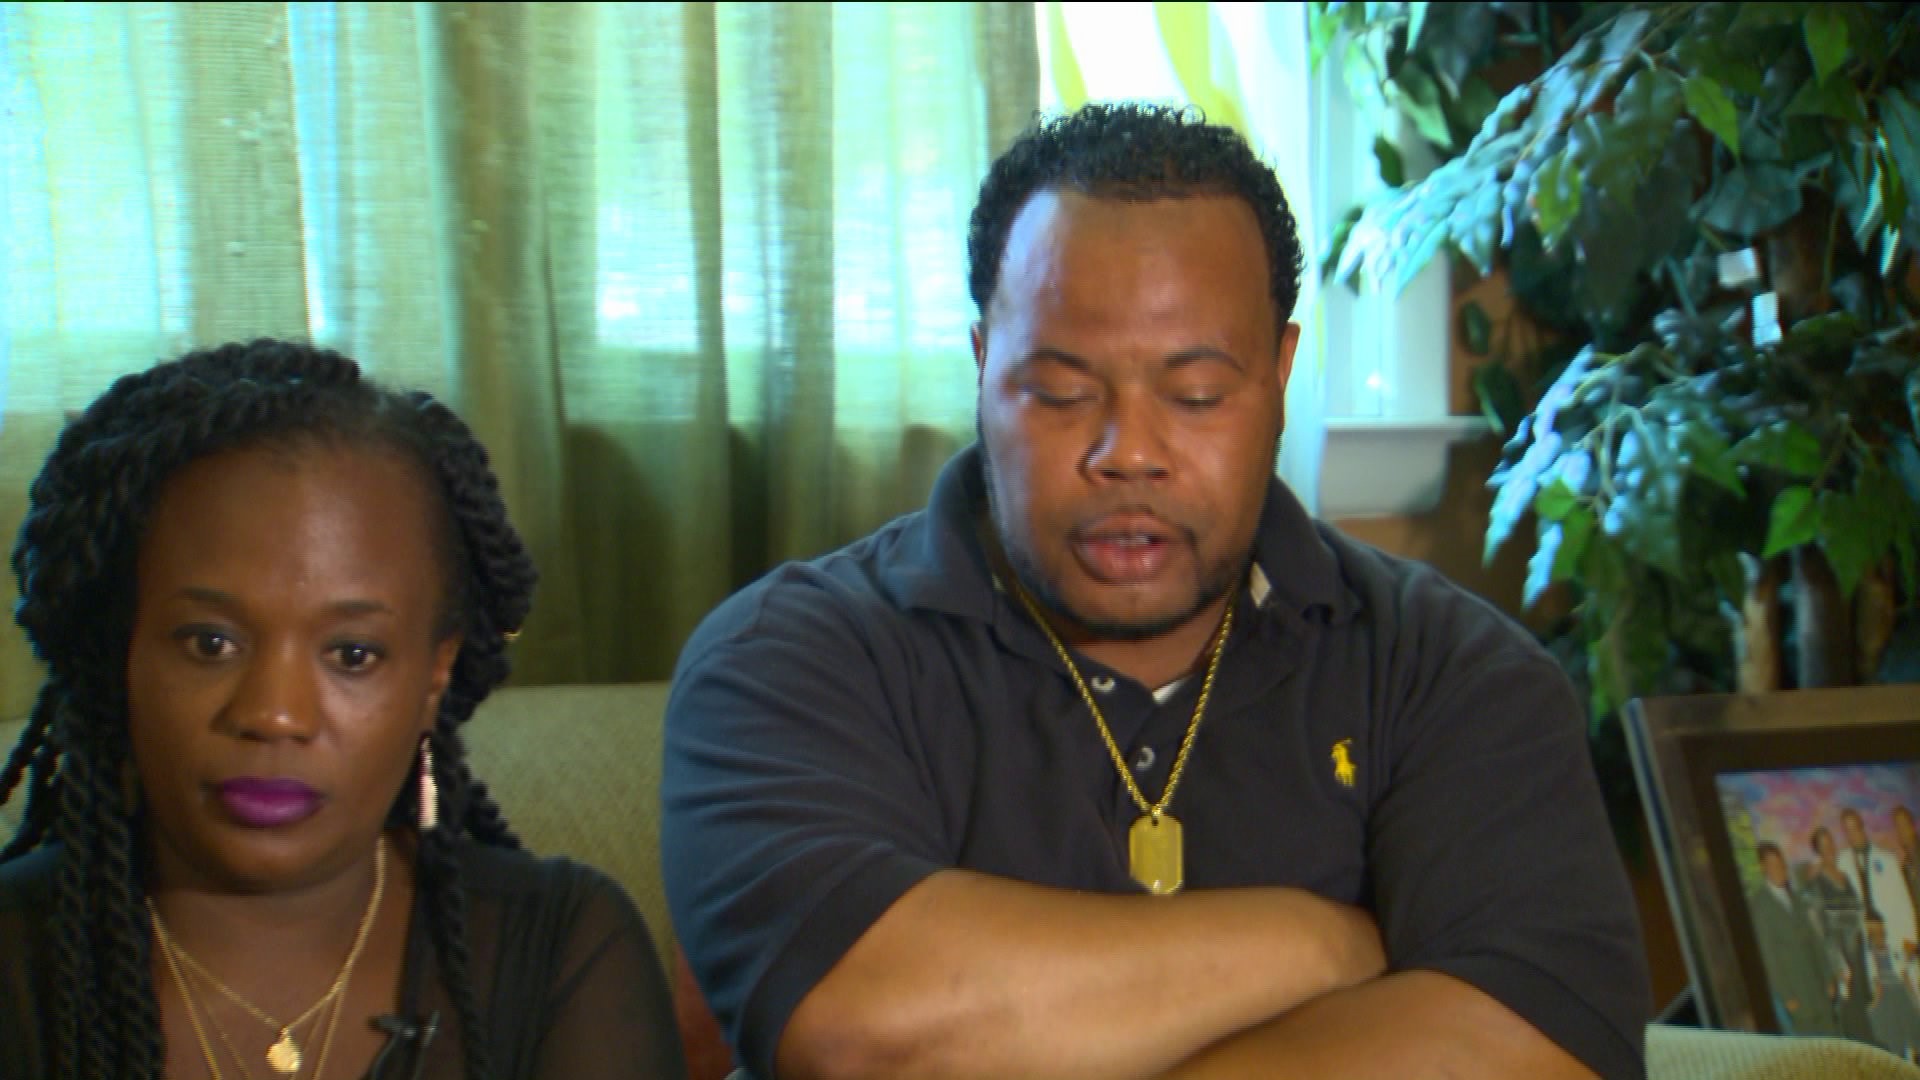 Family says they were a subject to racism